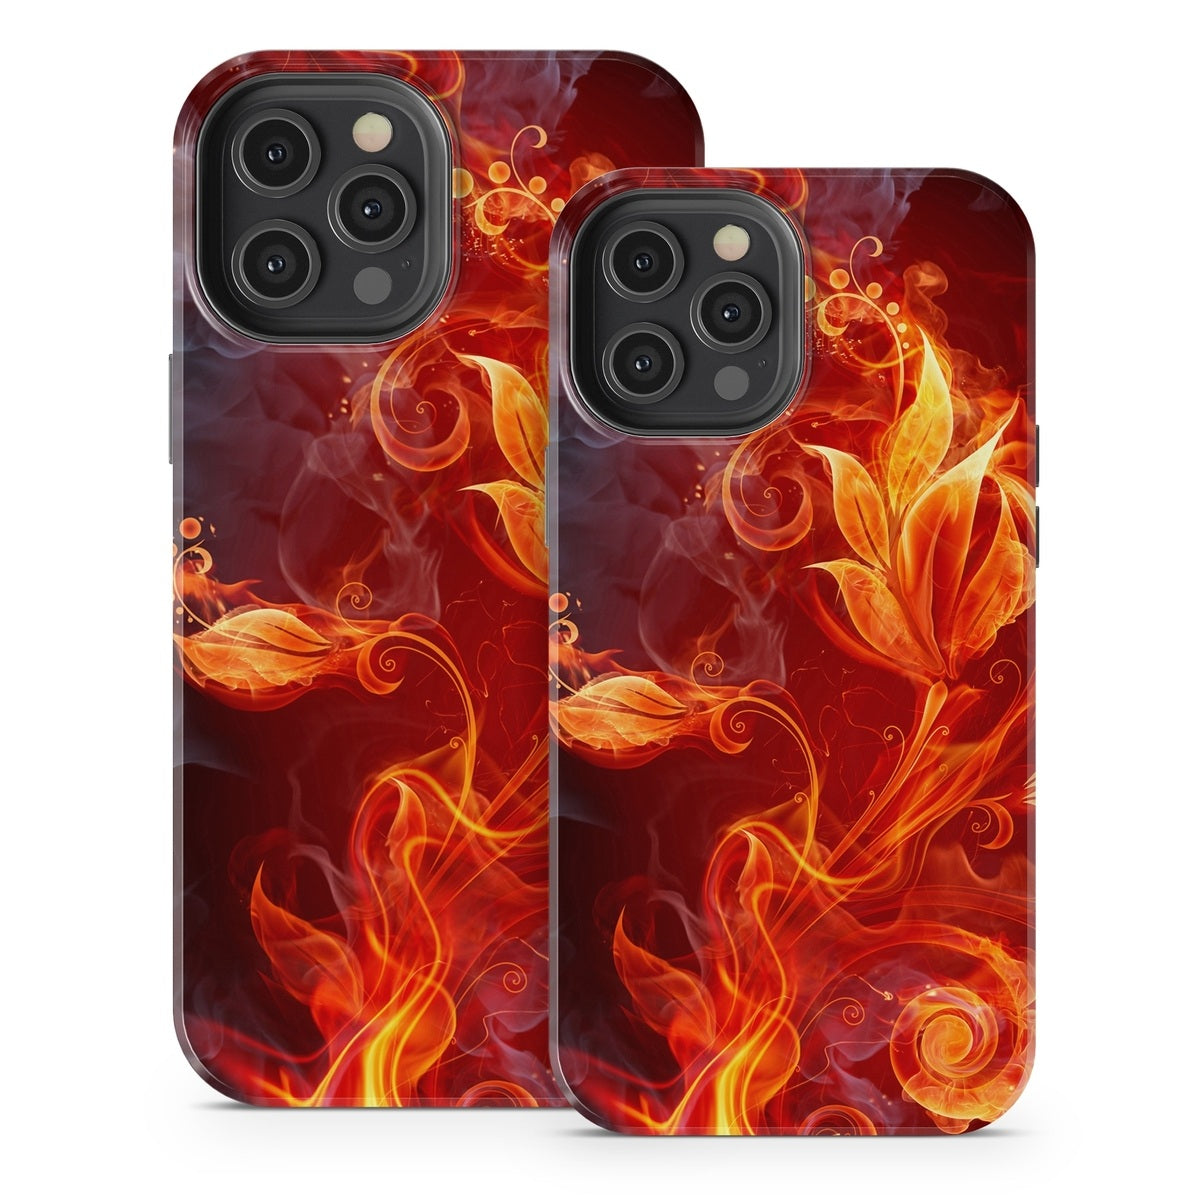 Flower Of Fire - Apple iPhone 12 Tough Case